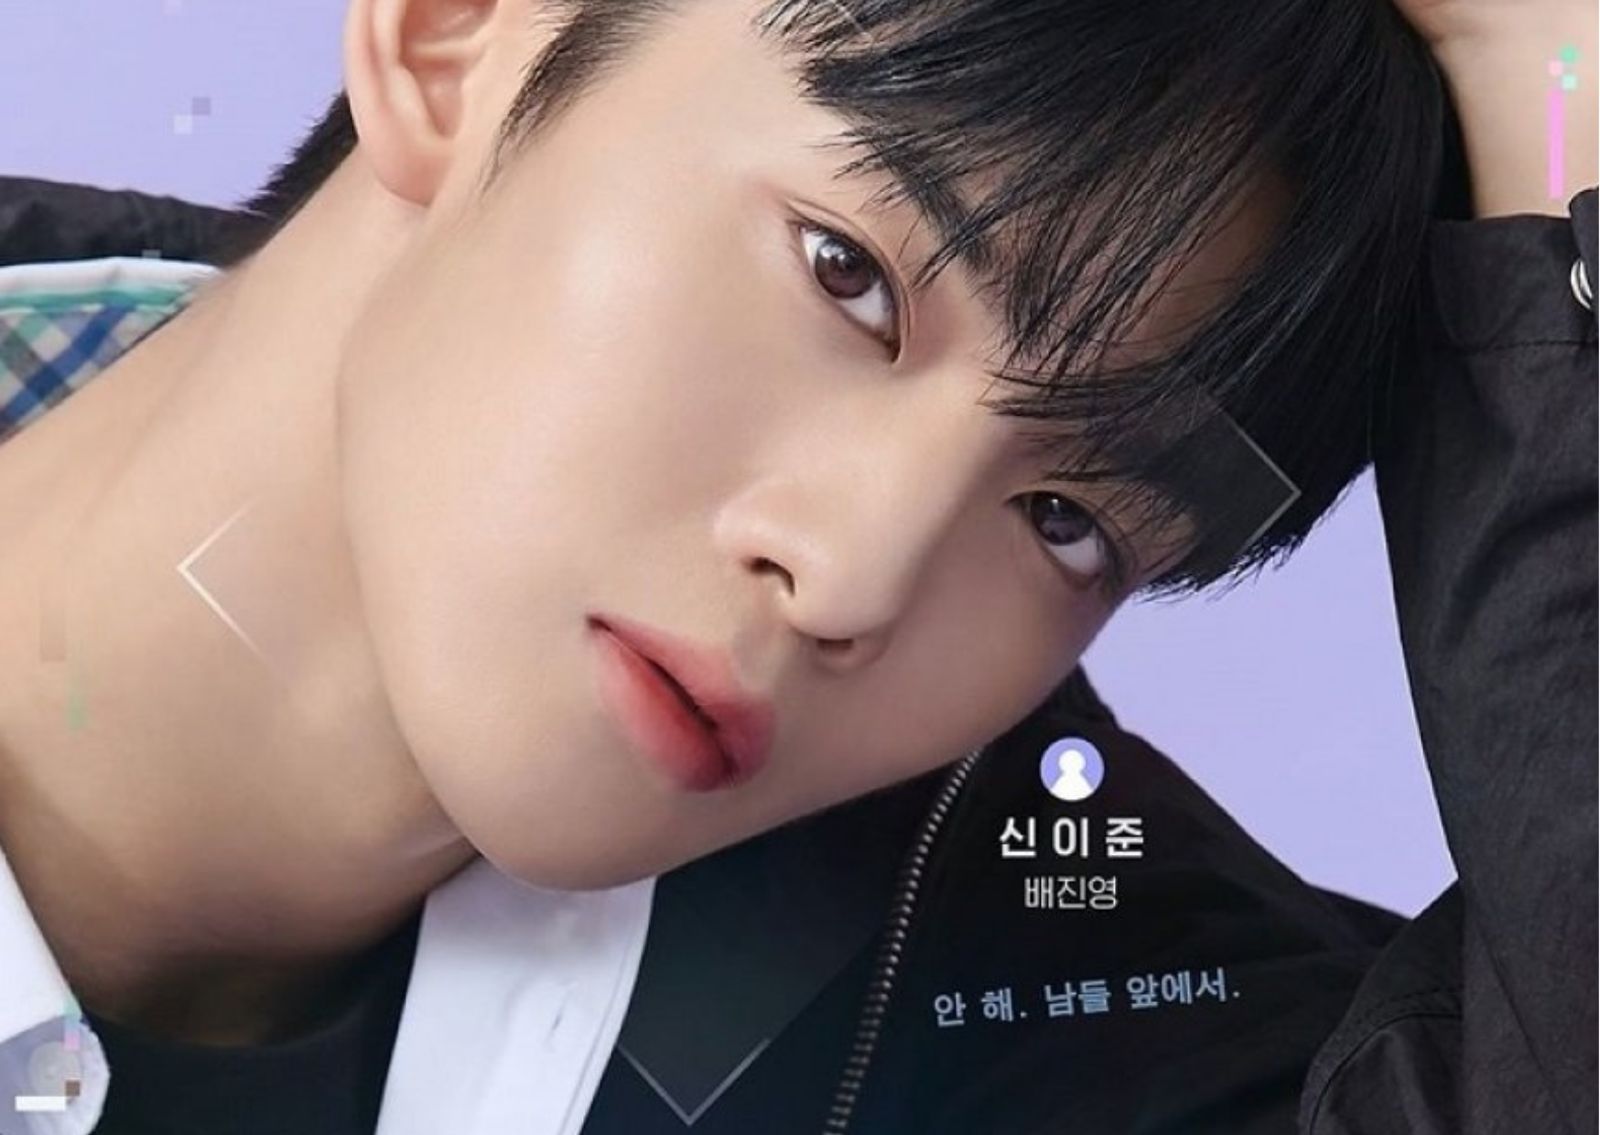 Shin Yijoon, the male lead in this drama, is played by Bae Jinyoung